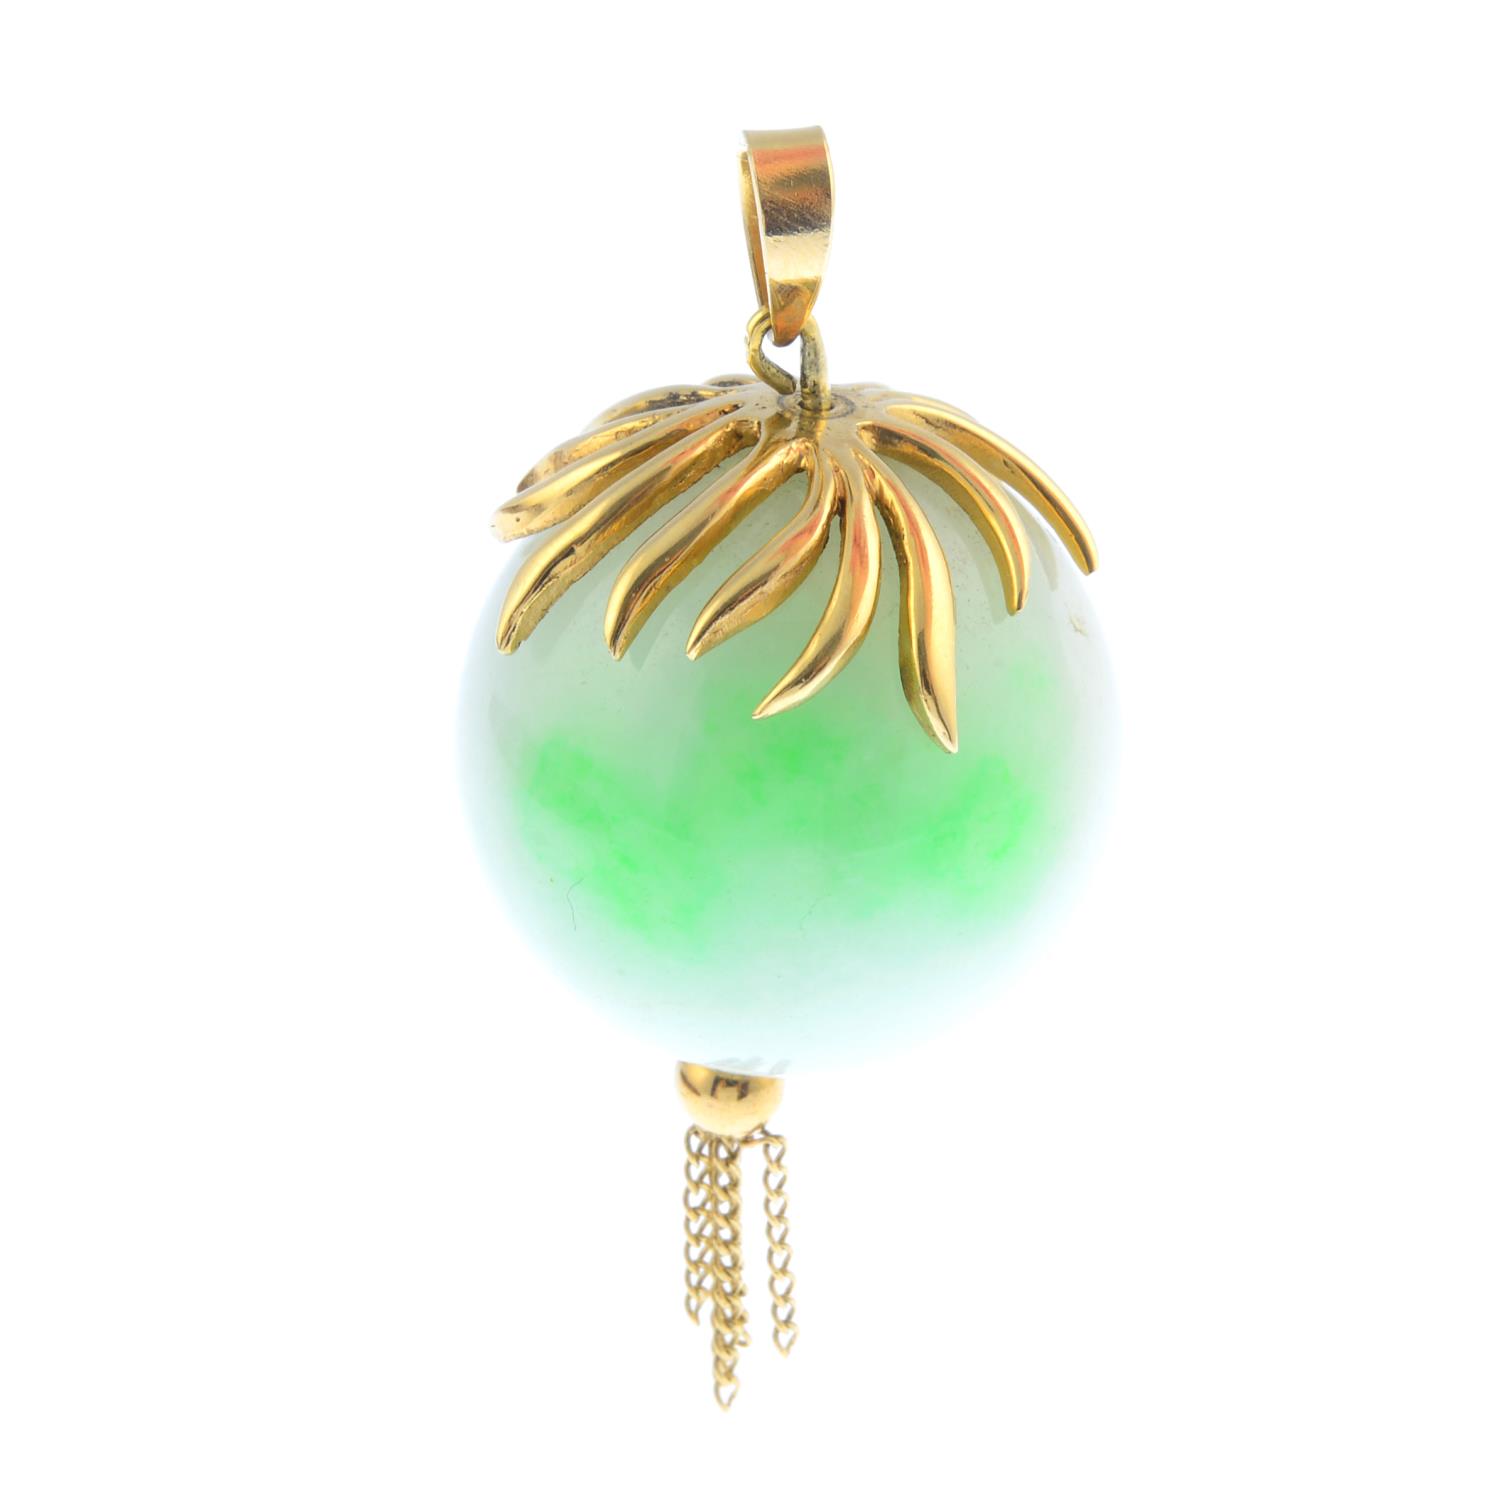 (202928) A jade pendant. The jadeite sphere, with bead and tassel drop, suspended from an abstract